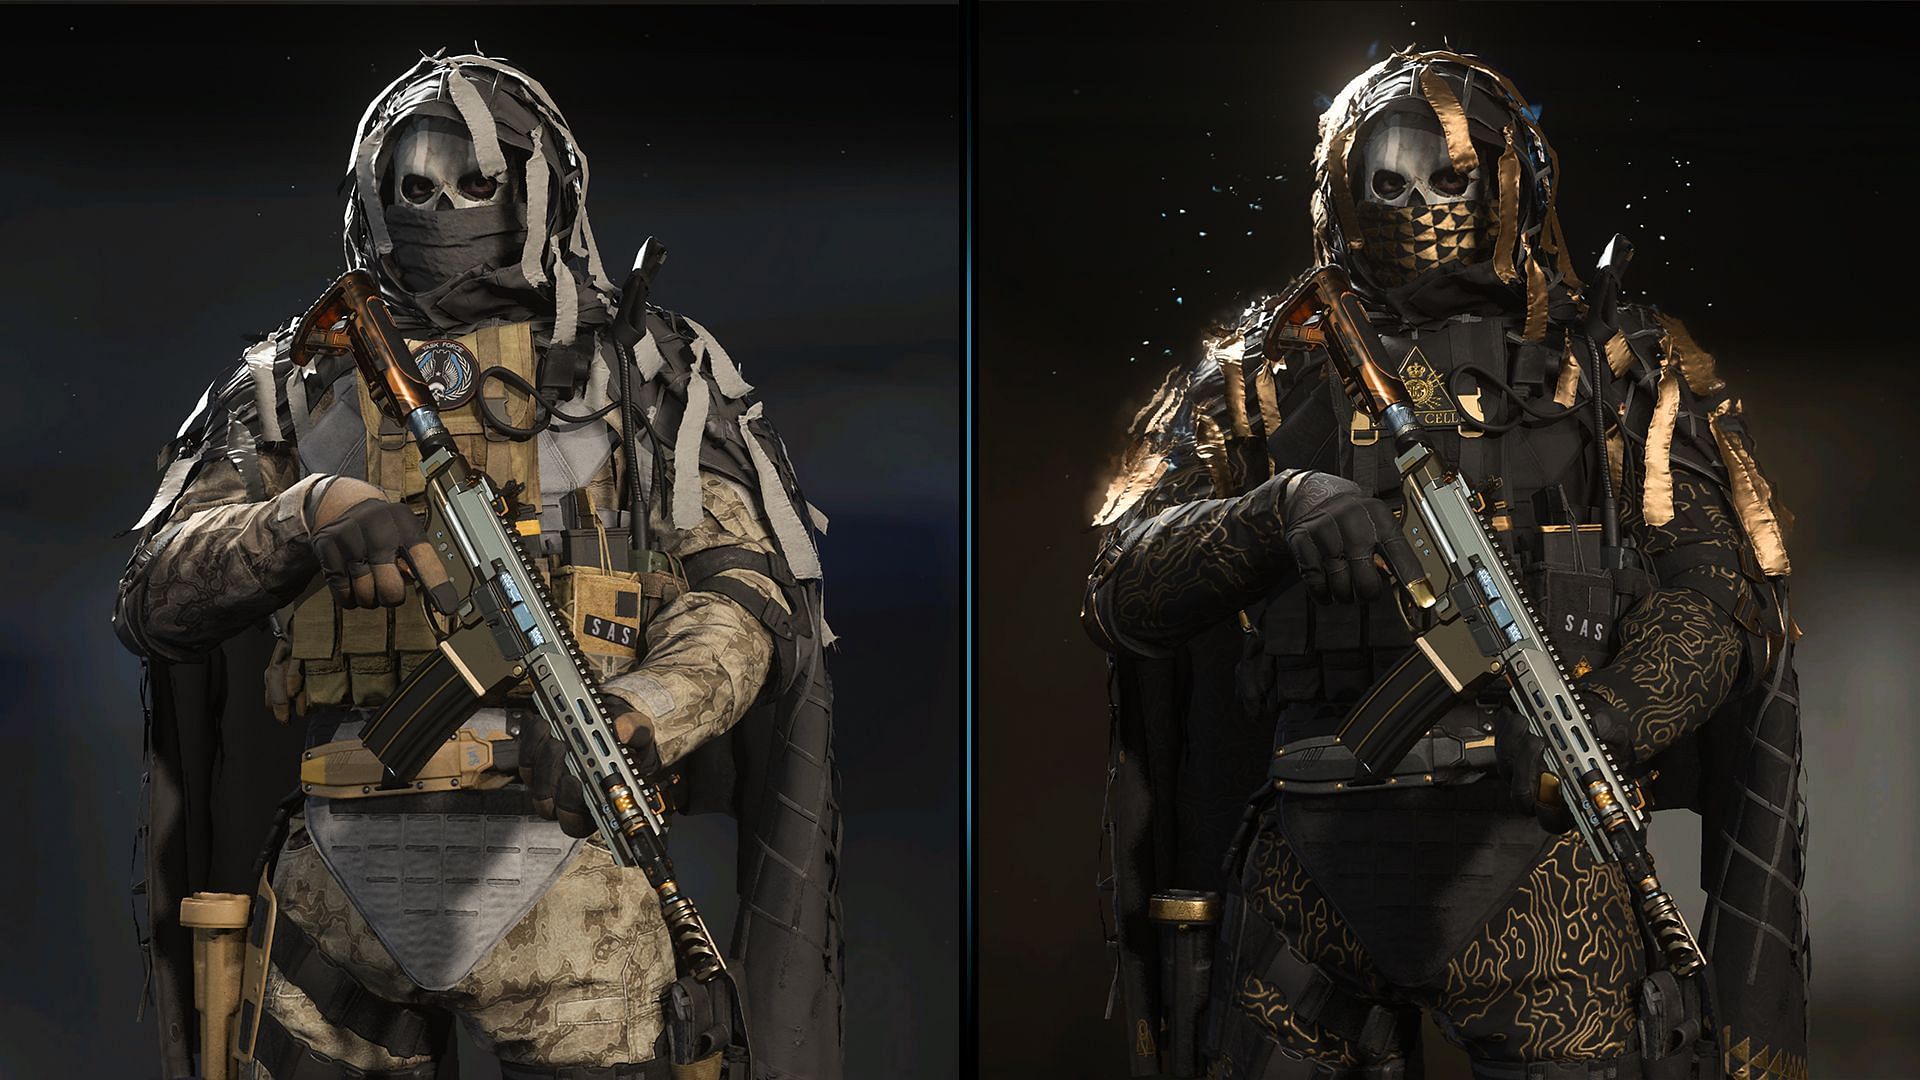 How to unlock The Rook skin for Ghost in Warzone 2 and Modern